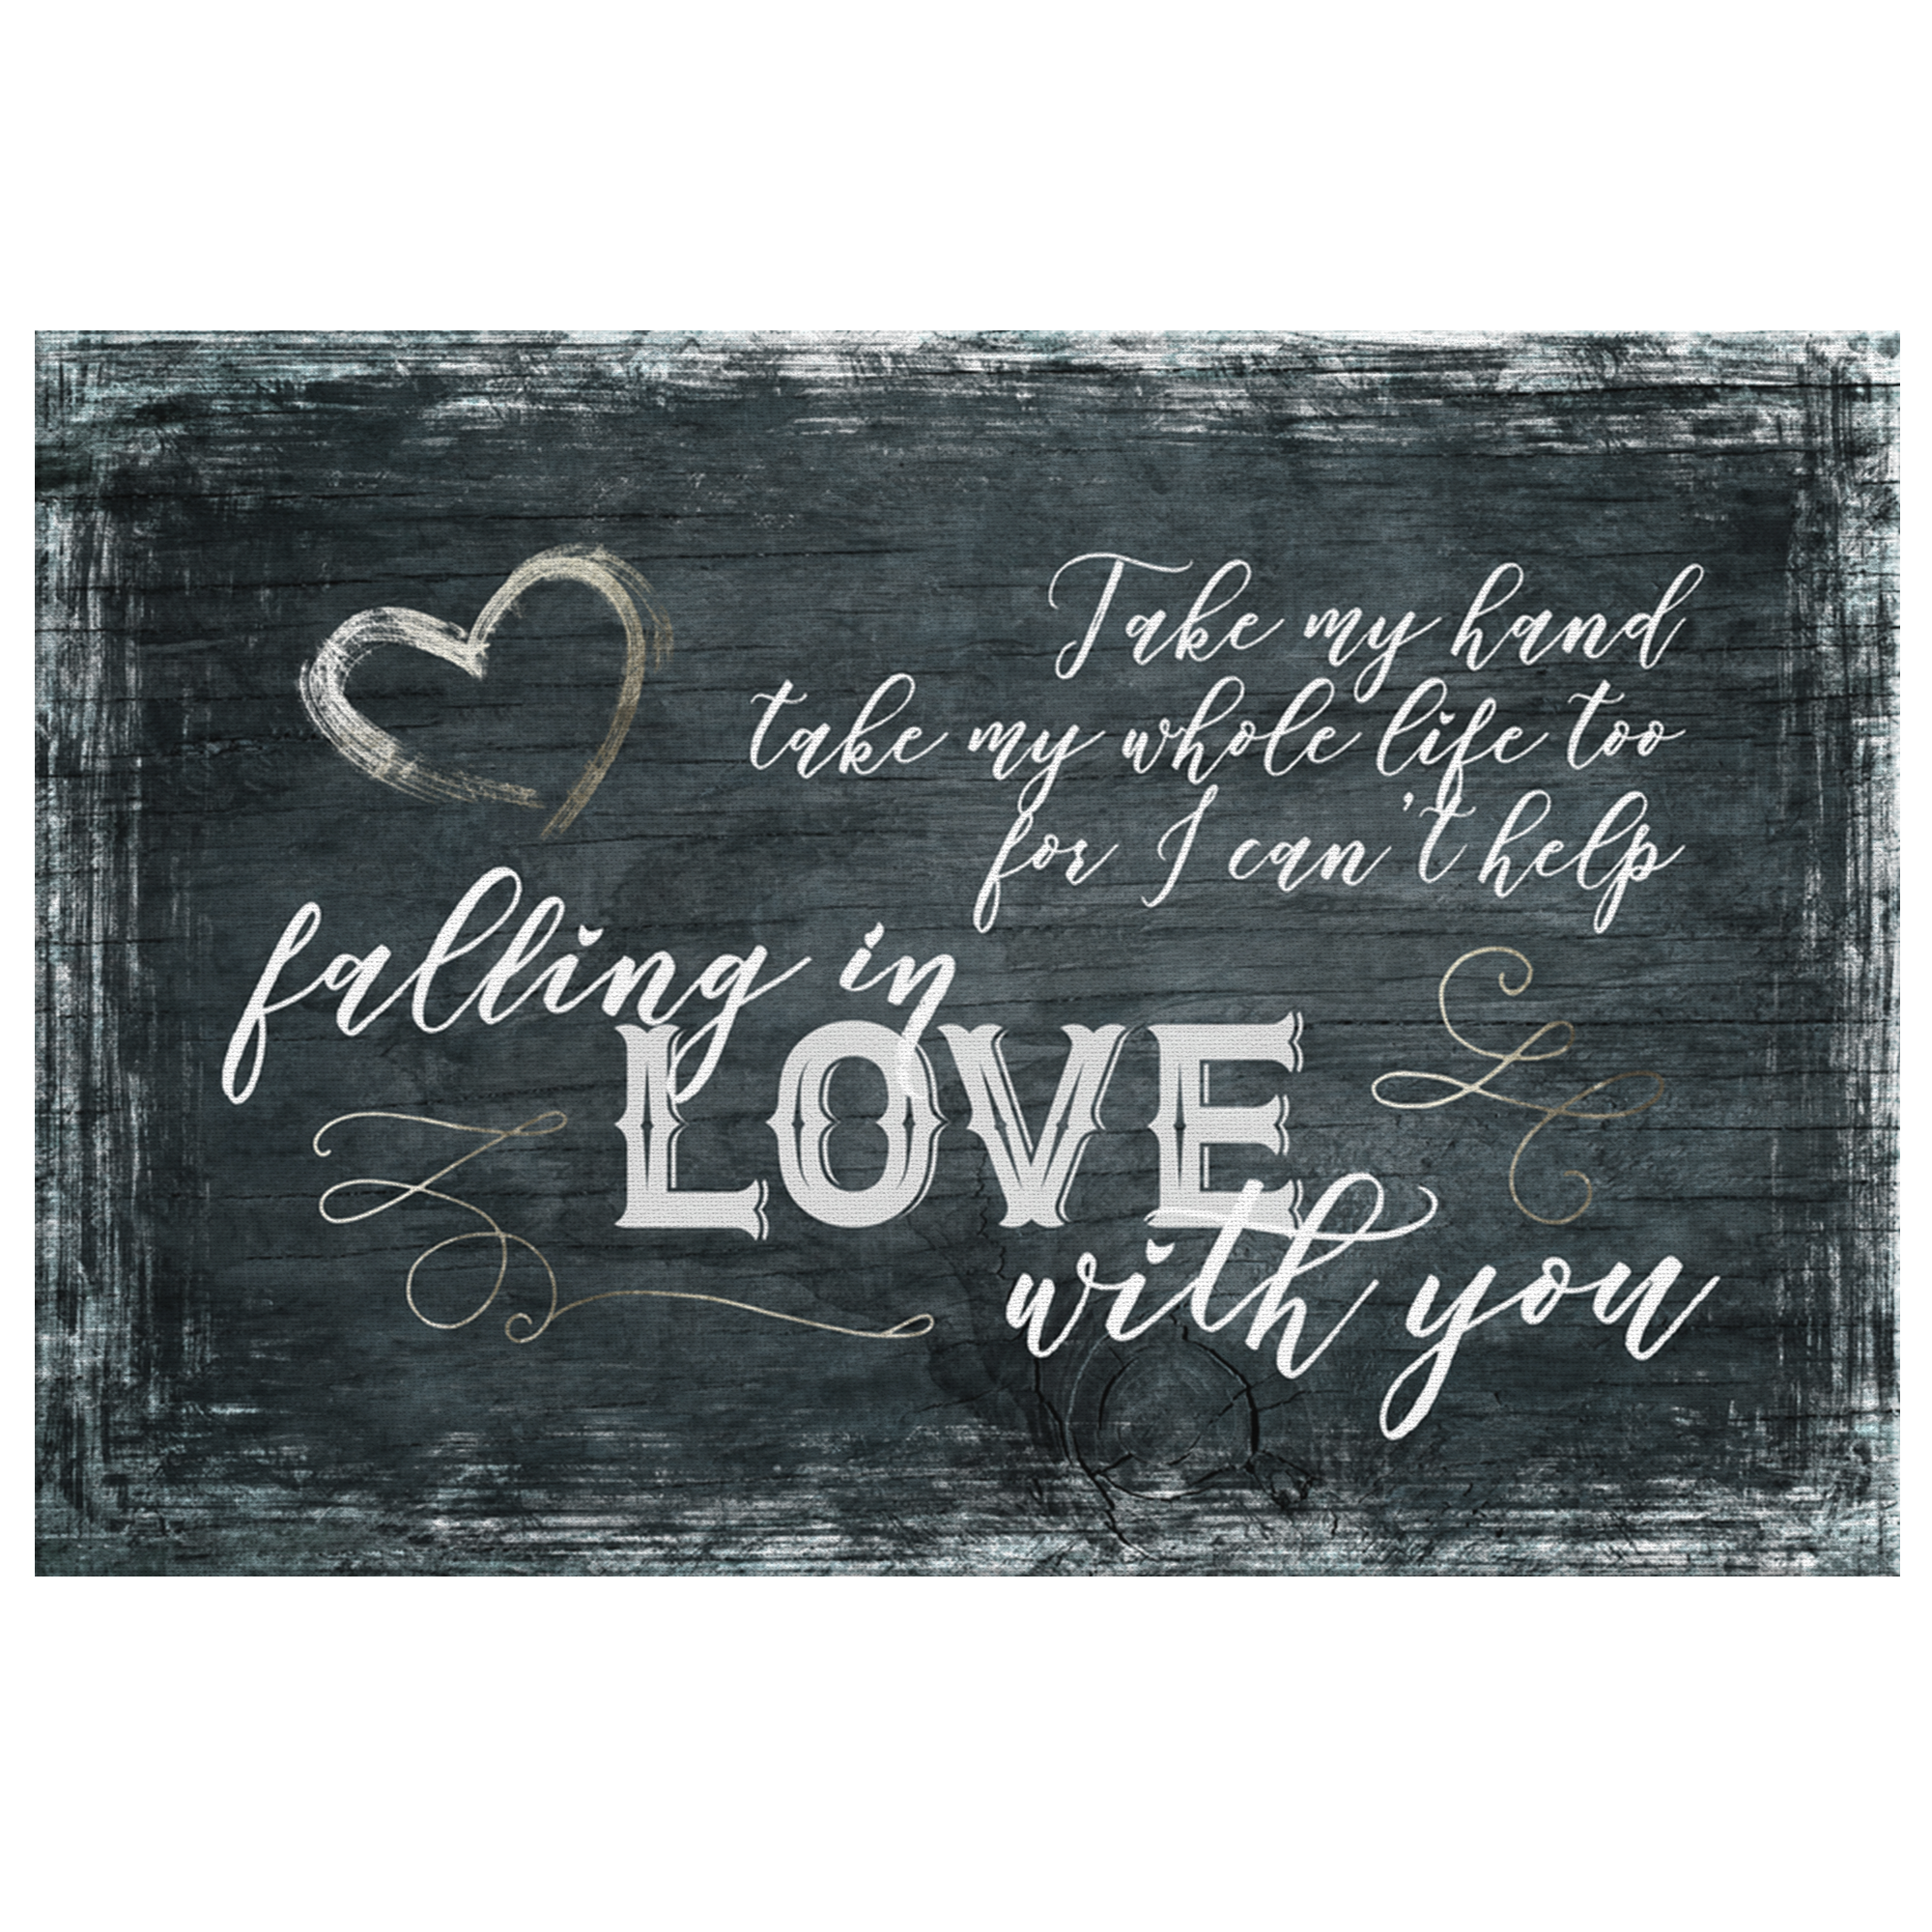 For I Can T Help Falling In Love With You Couples Canvas Wall Art Gearden